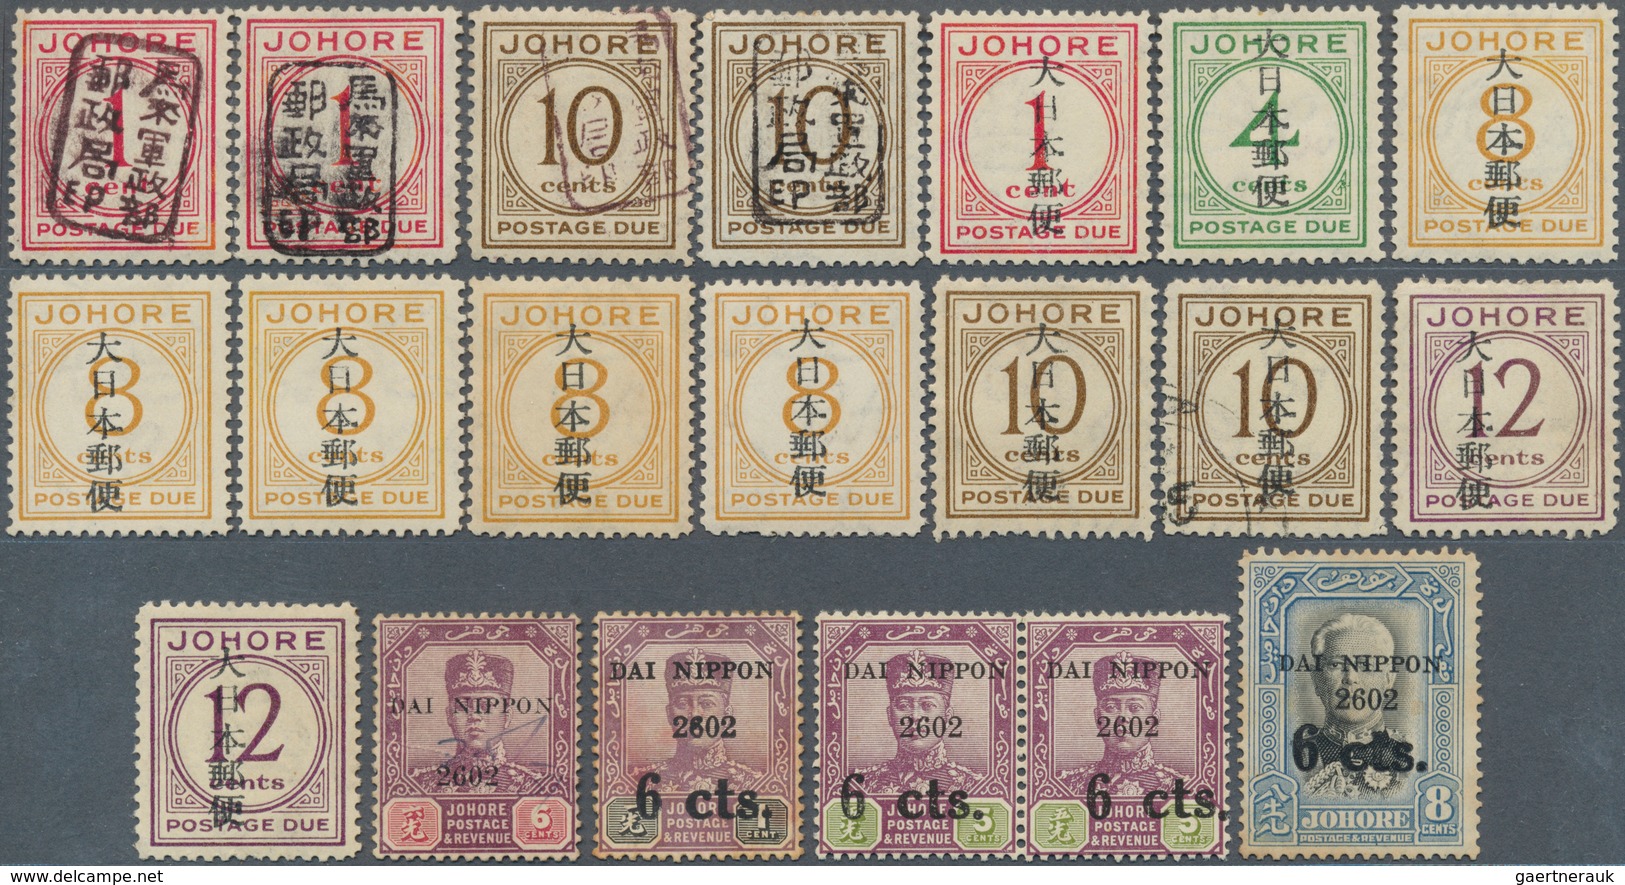 05815 Malaiische Staaten - Johor-Portomarken: Japanese Occupation, 1942, Dues With Small Seal (4) Or 'dain - Johore